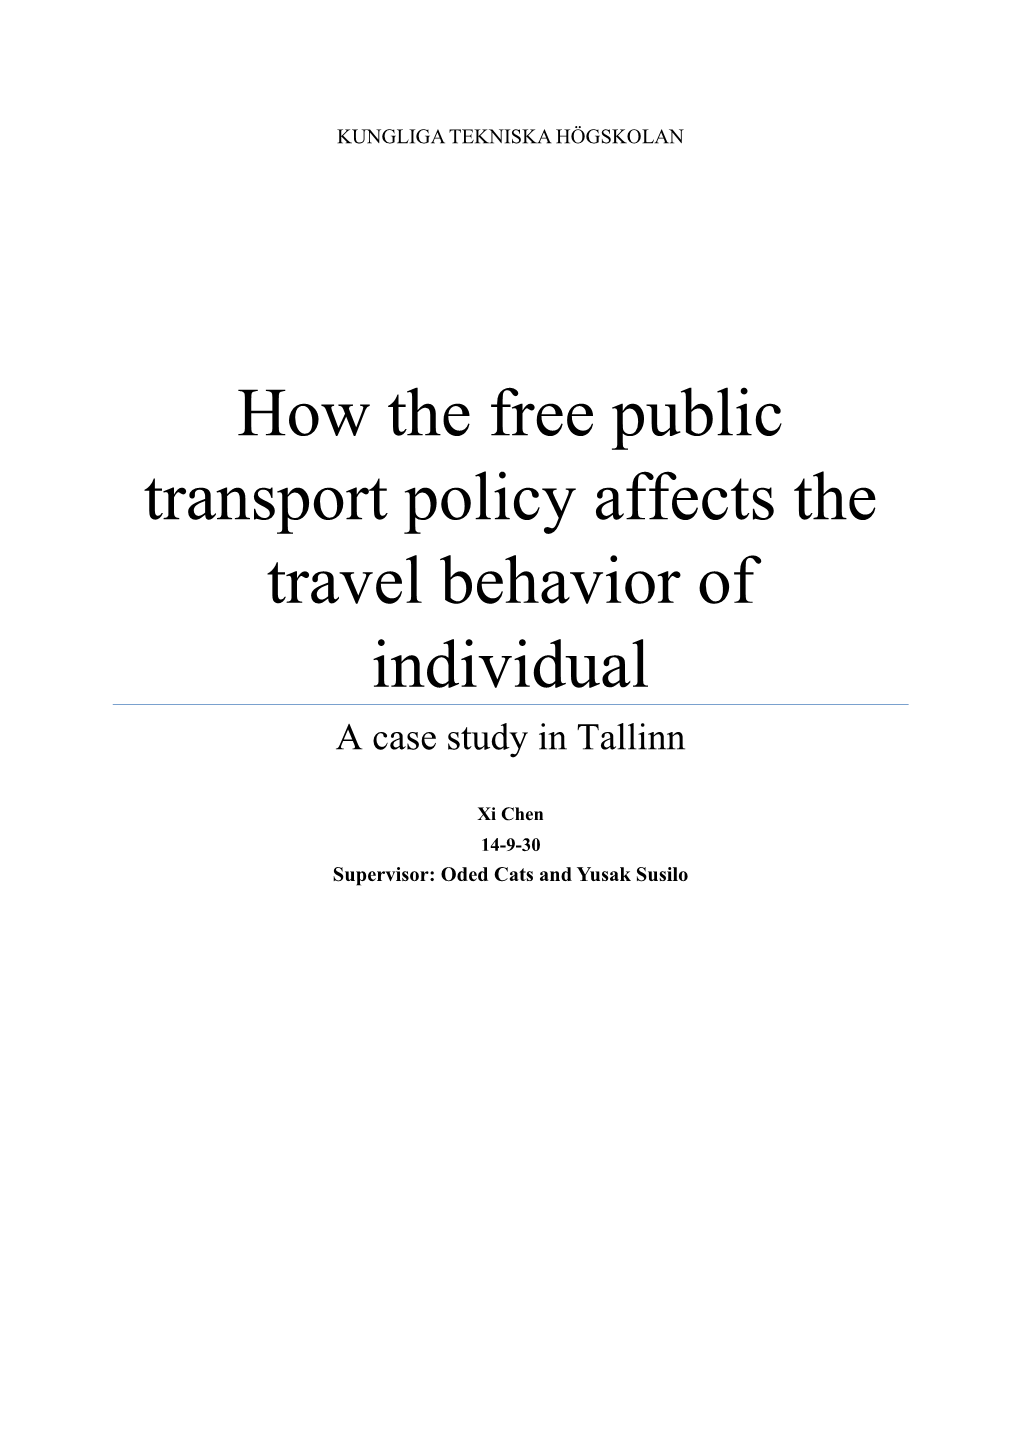 How the Free Public Transport Policy Affects the Travel Behavior of Individual a Case Study in Tallinn